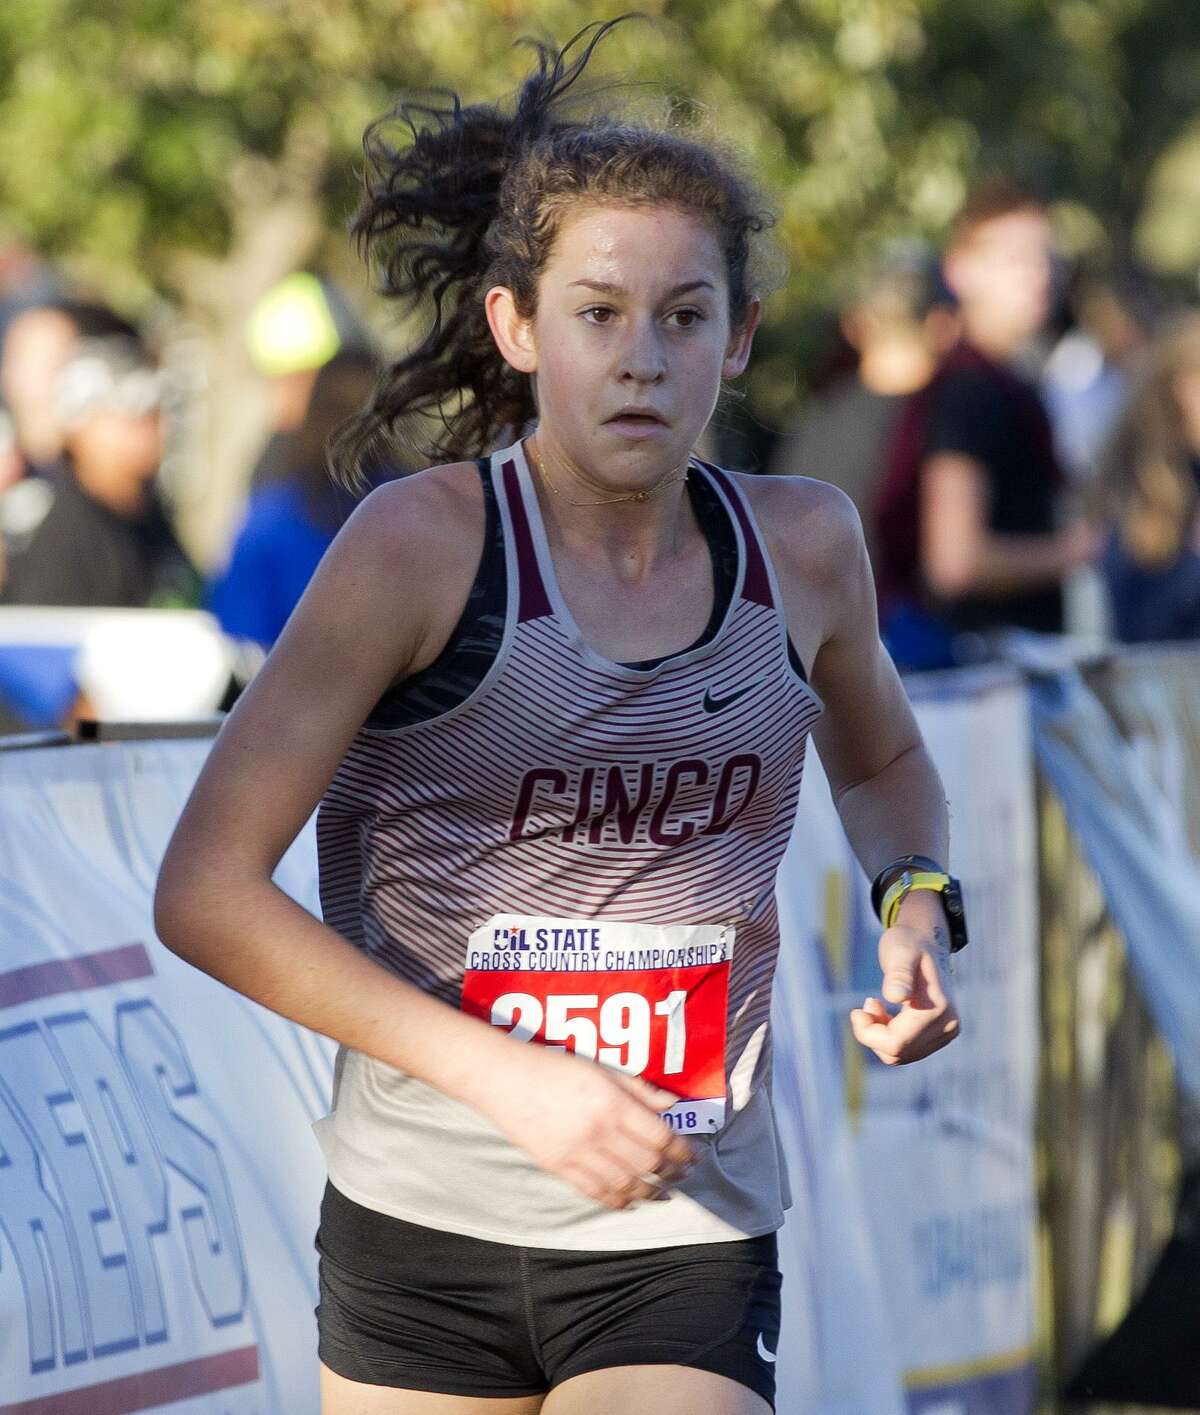 Sophie Atkinson of Cinco Ranch competes in the Class 6A girls race during the UIL State Cross Country Championships, Saturday, Nov. 3, 2018, in Round Rock. Atkinson finished ninth overall in the race.